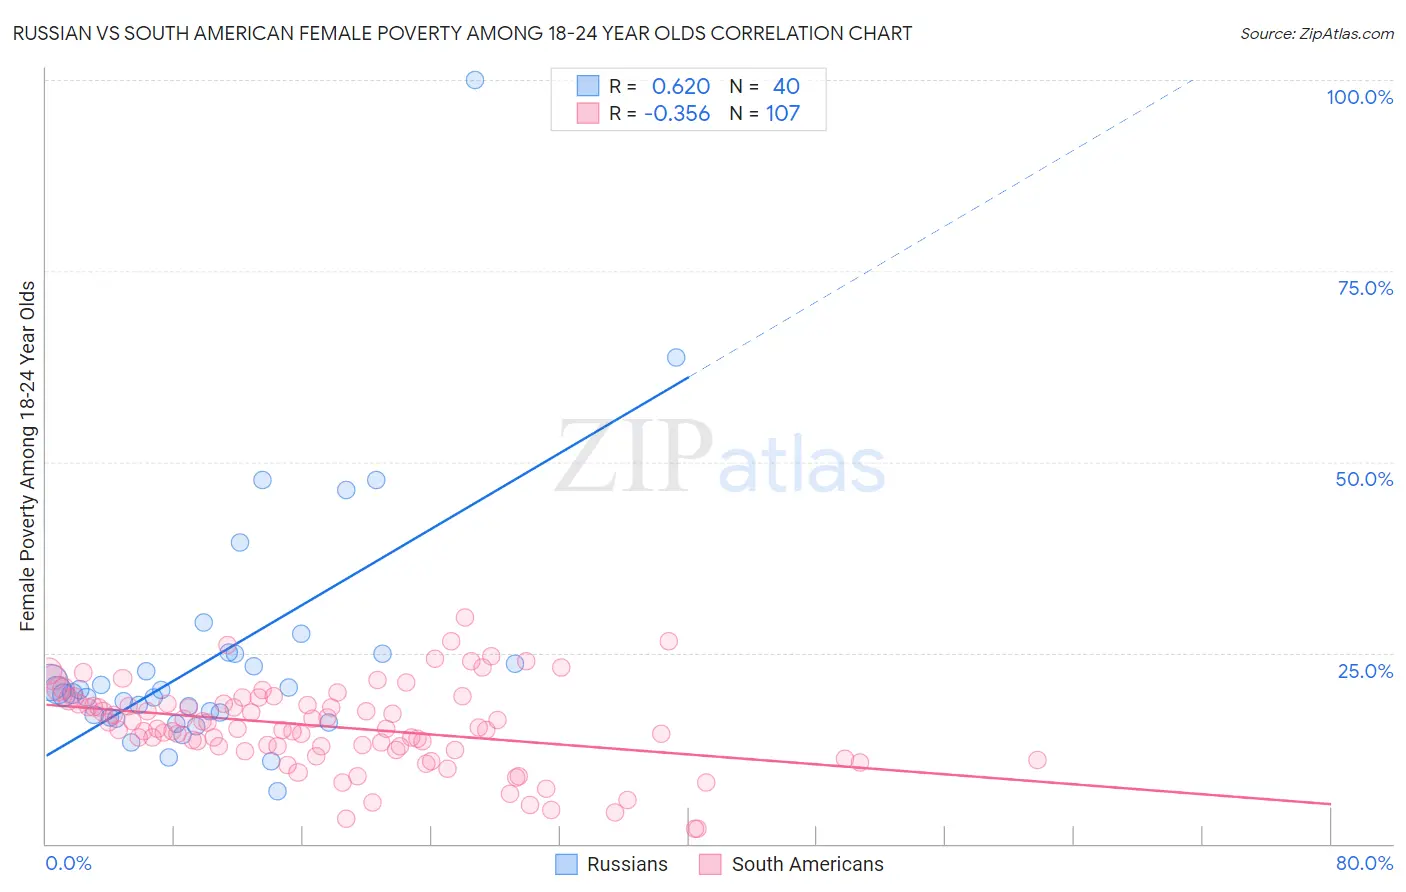 Russian vs South American Female Poverty Among 18-24 Year Olds